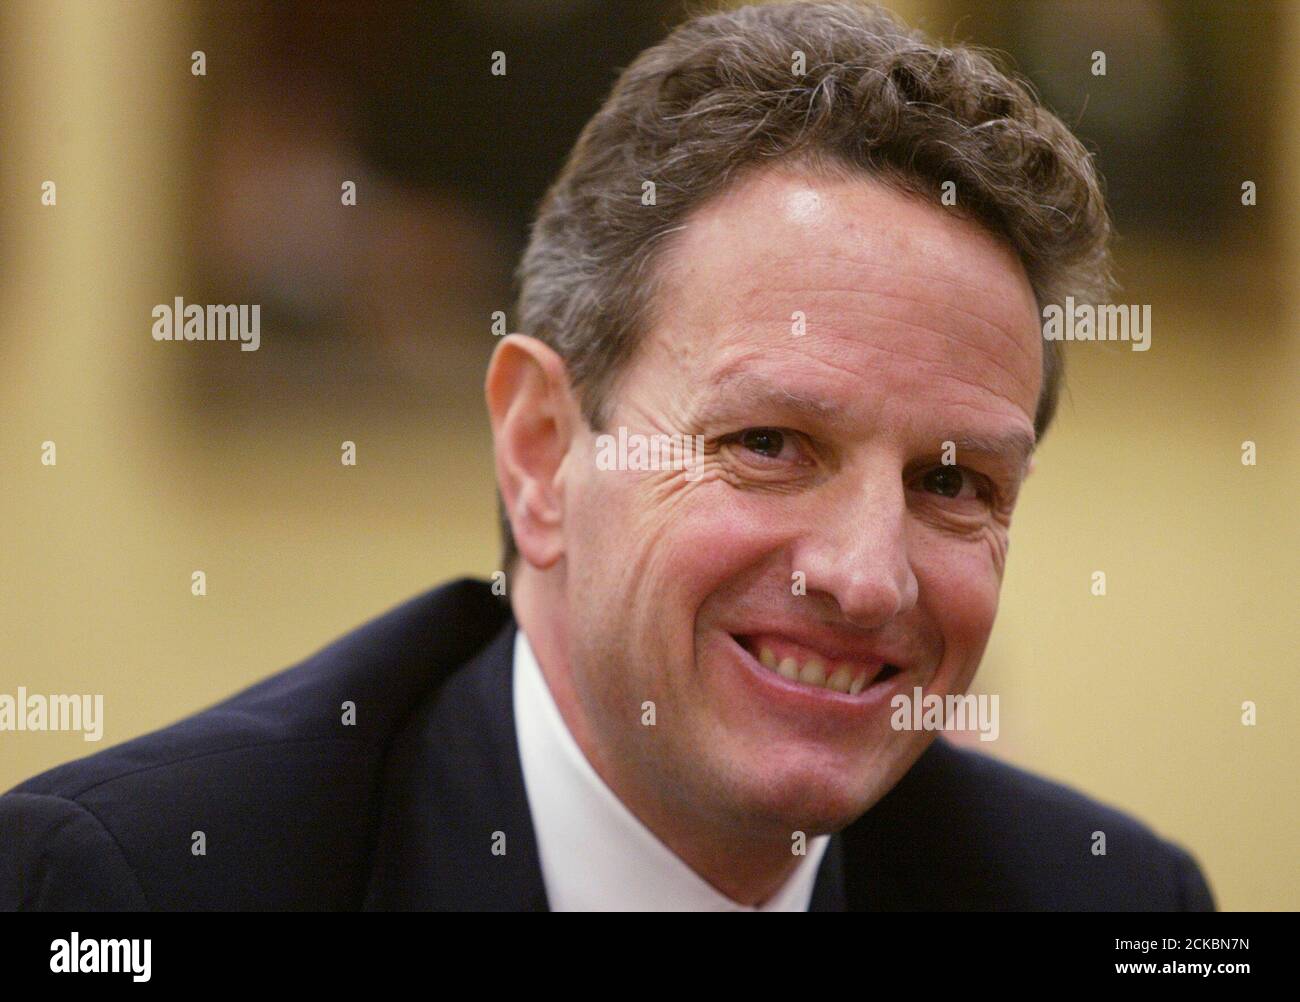 U.S. Treasury Secretary Timothy Geithner smiles as he testifies about the Obama administration's budget proposals and goals for economic recovery and reform before the House Appropriations Subcommittee on General Government and Financial Services on Capitol Hill in Washington, May 21, 2009. Geithner said that a bailout for banks was steadying the financial system but care must be taken to ensure that normal market forces are allowed to operate.  REUTERS/Jim Bourg   (UNITED STATES POLITICS BUSINESS) Stock Photo